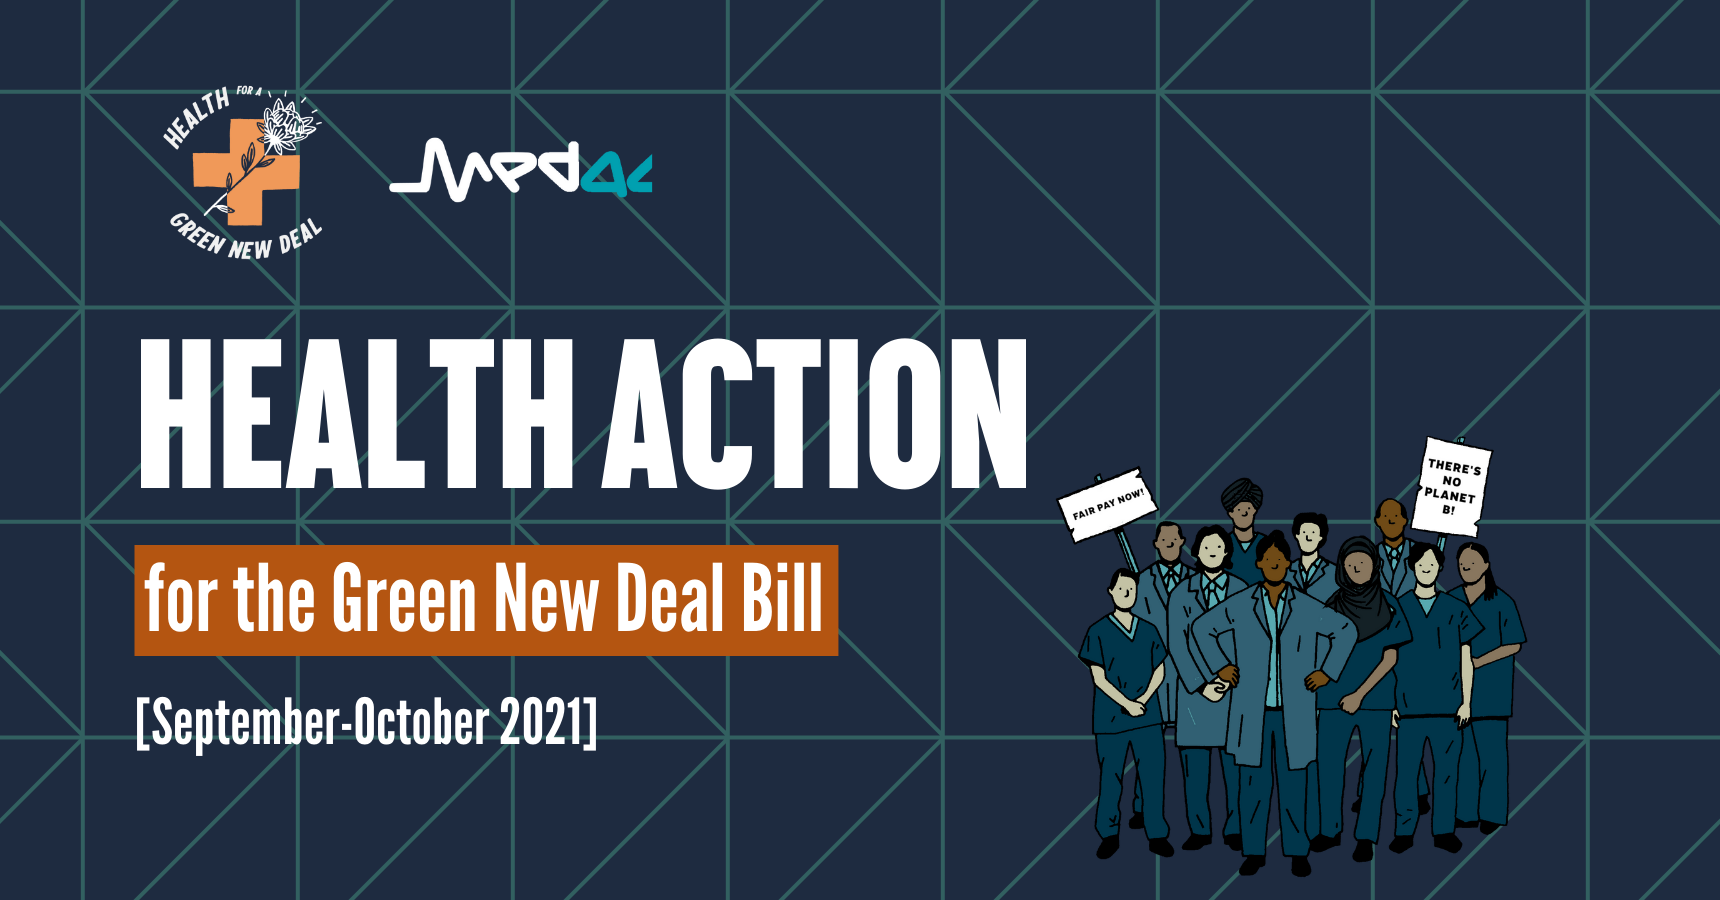 Health Action for the Green New Deal Bill, September-October 2021